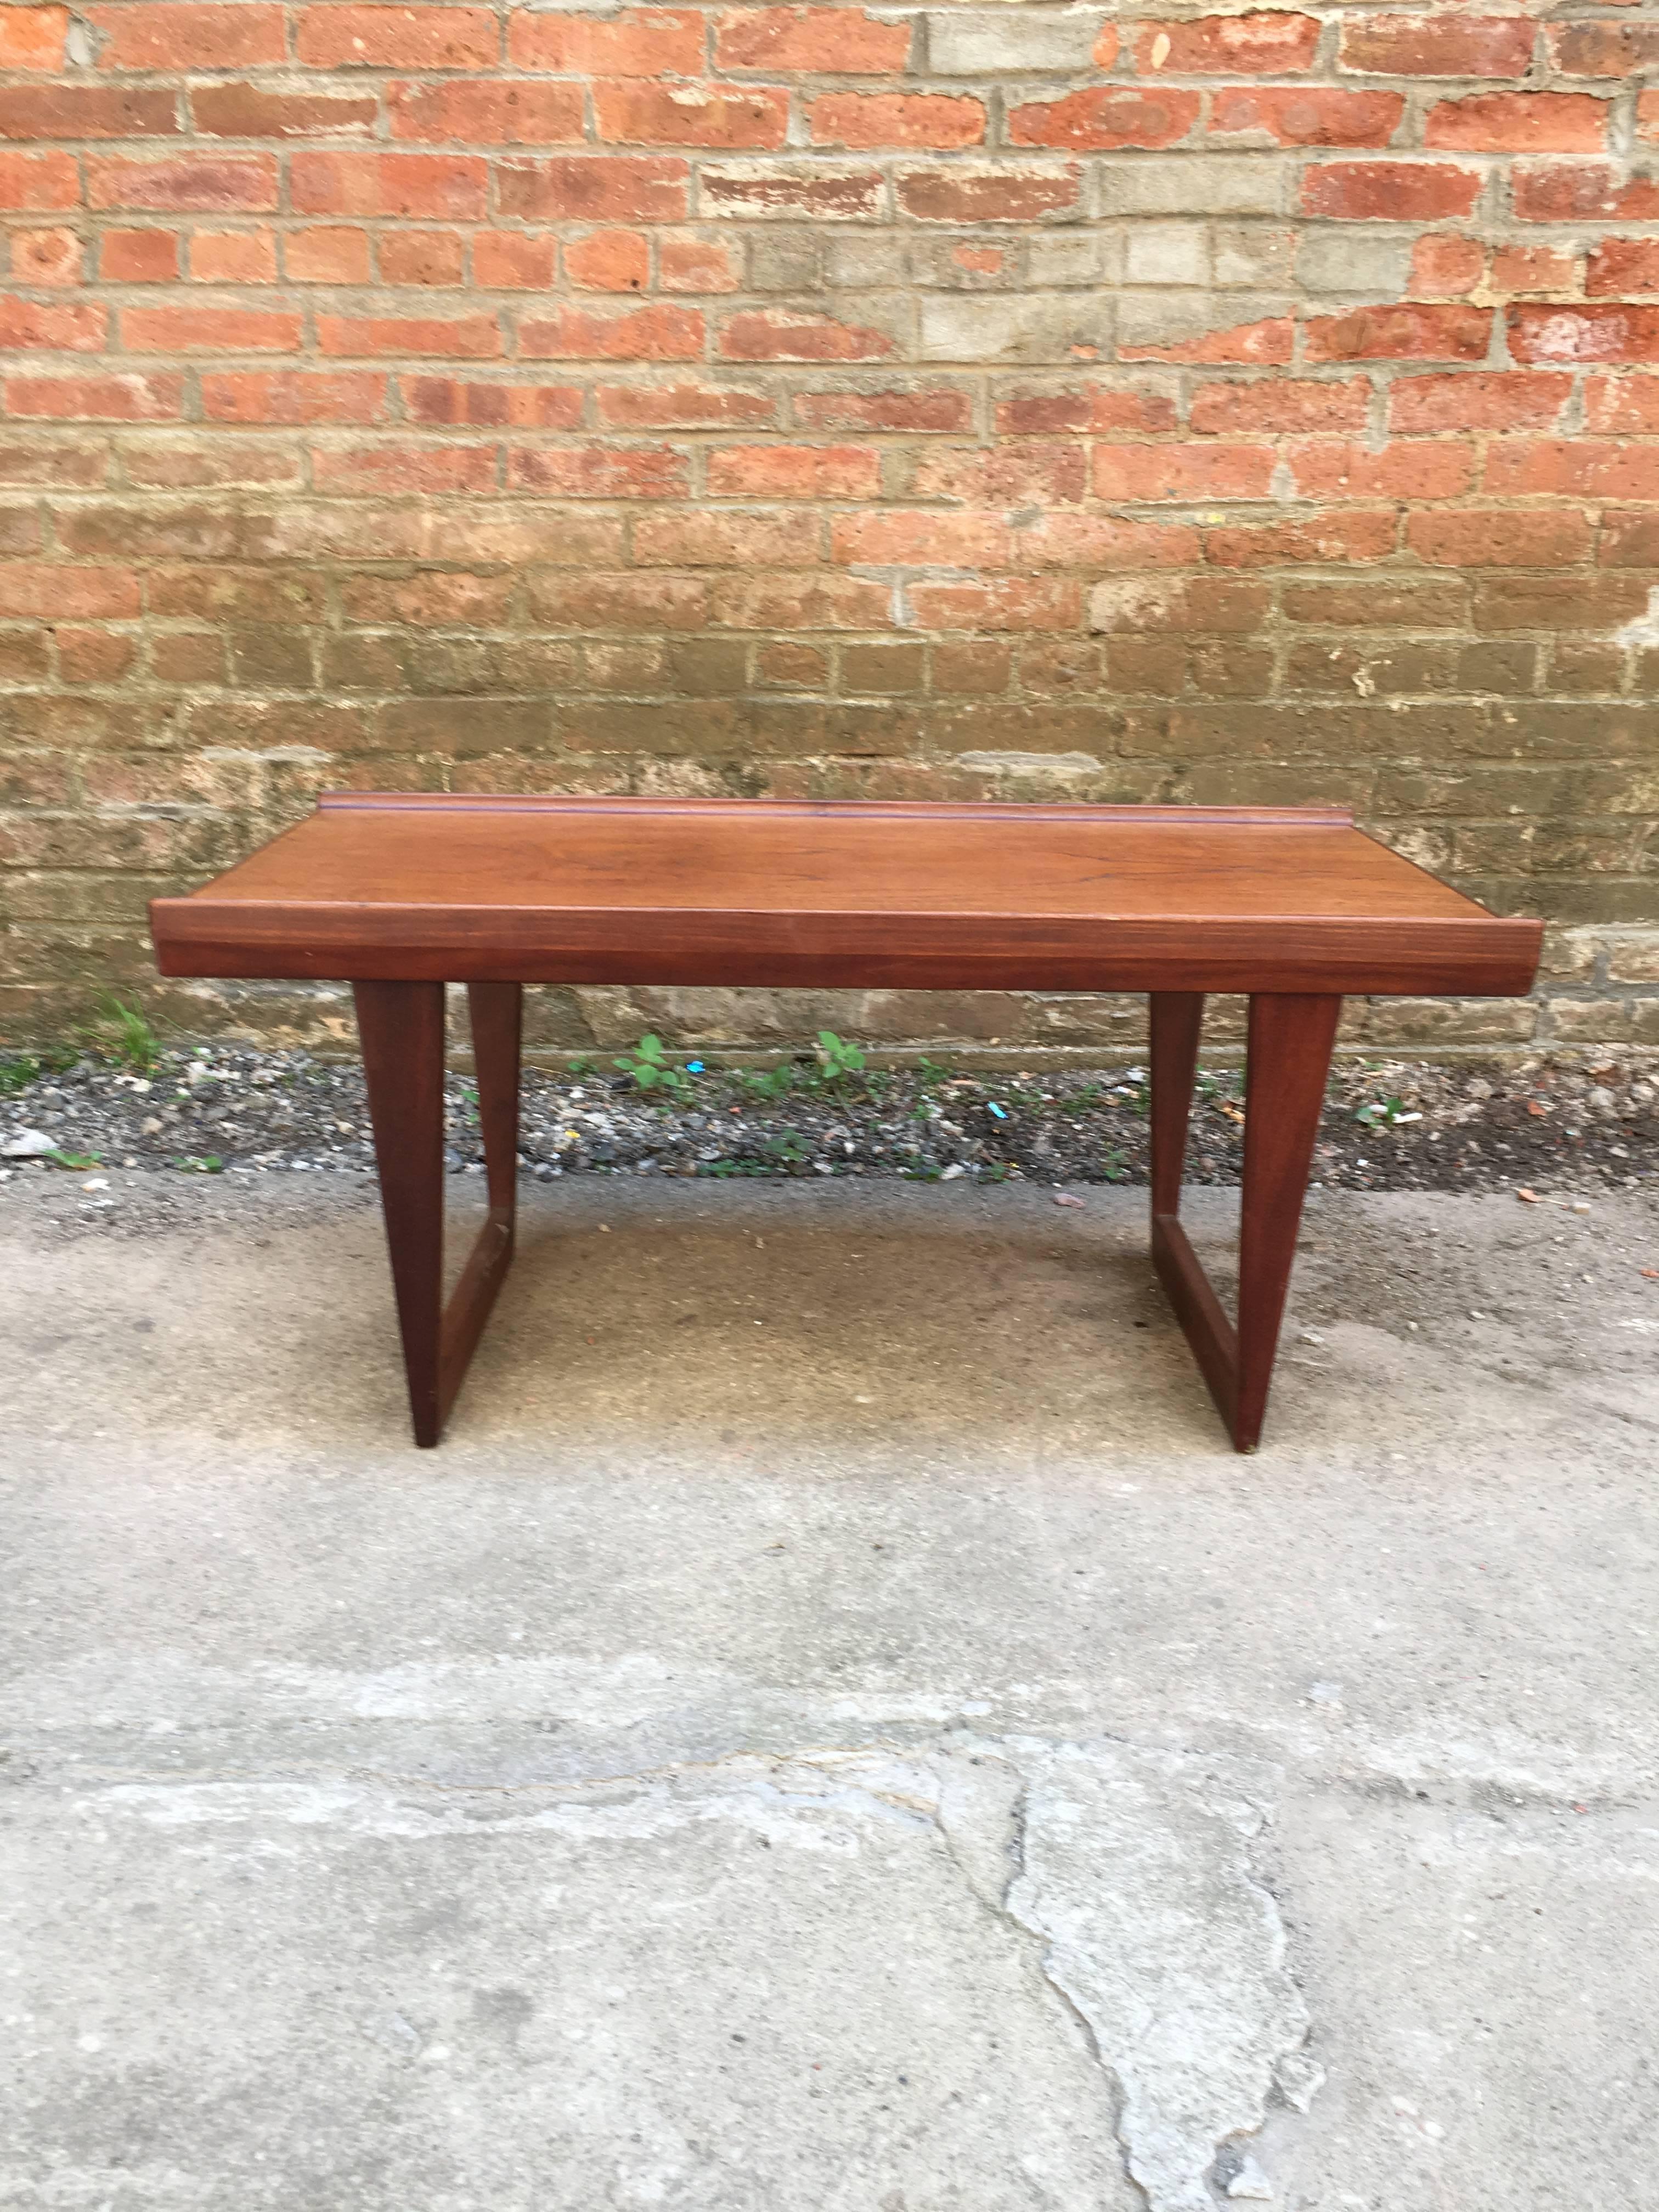 Excellent compact teak coffee table designed by Peter Loving Neilsen, Dansk Designs, Denmark. Solid teak legs and channeled sides. Fully signed with burn in mark on the bottom. Good original finish.